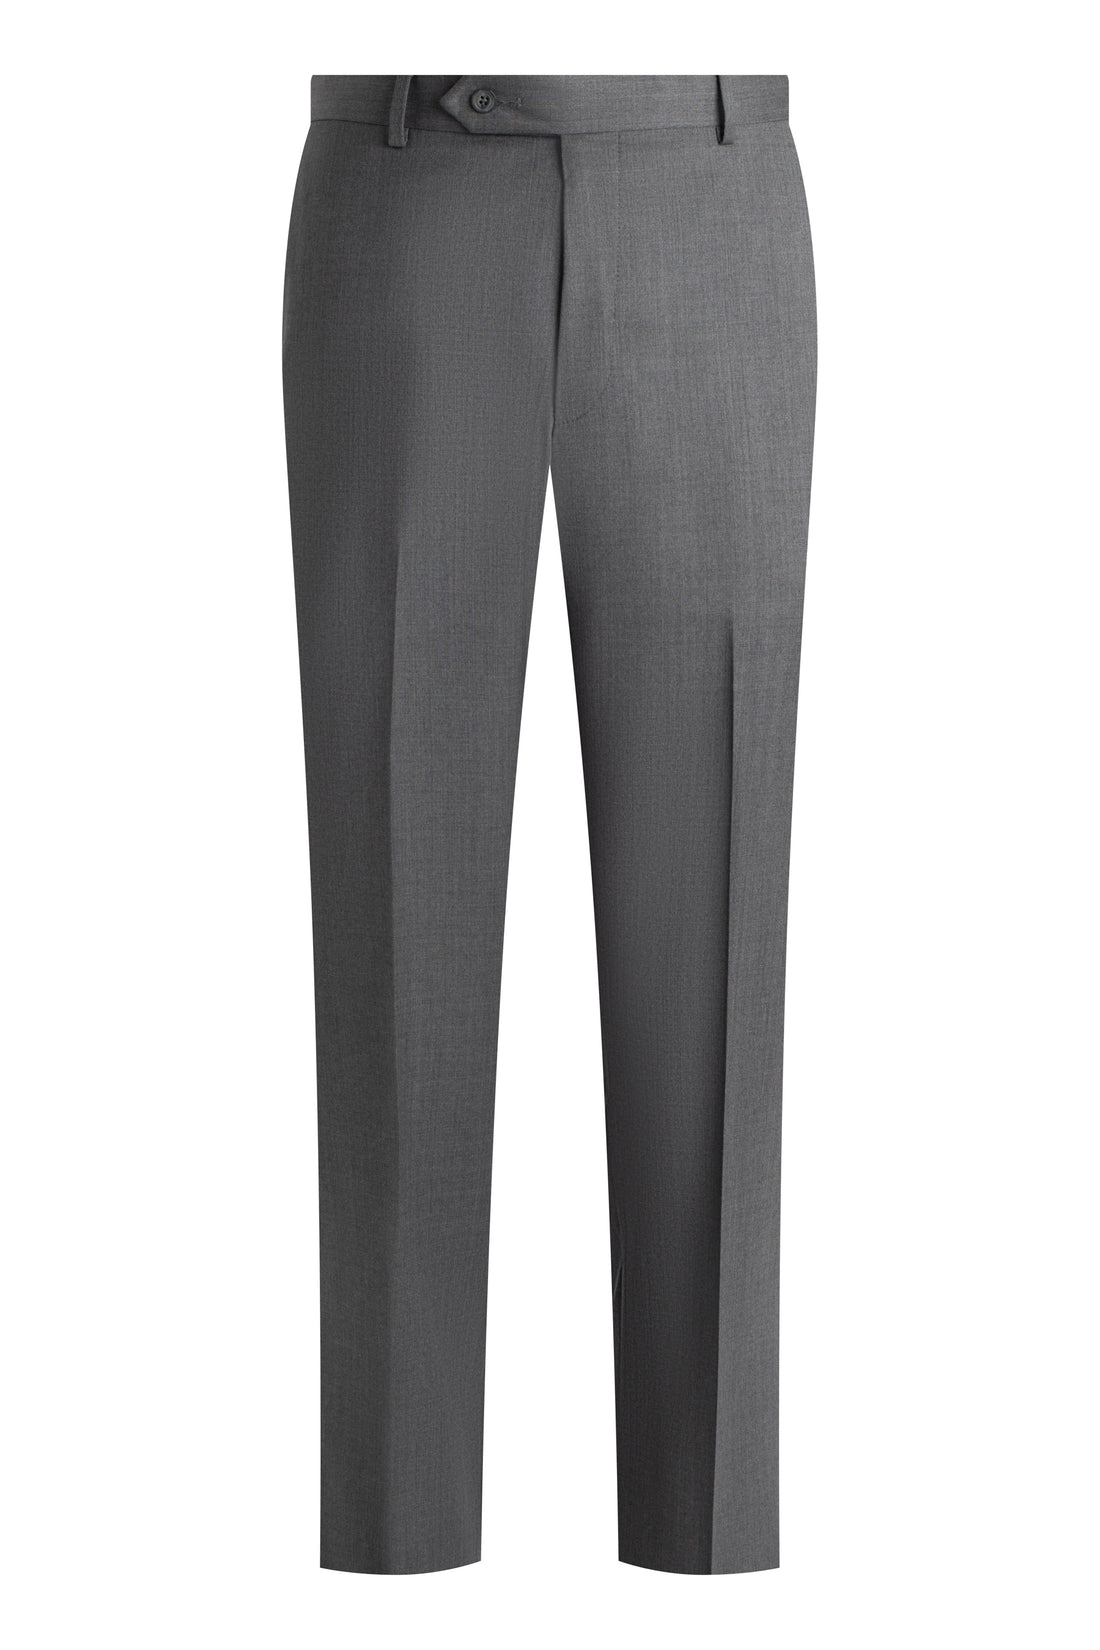 Grey Smart Wool Trousers front